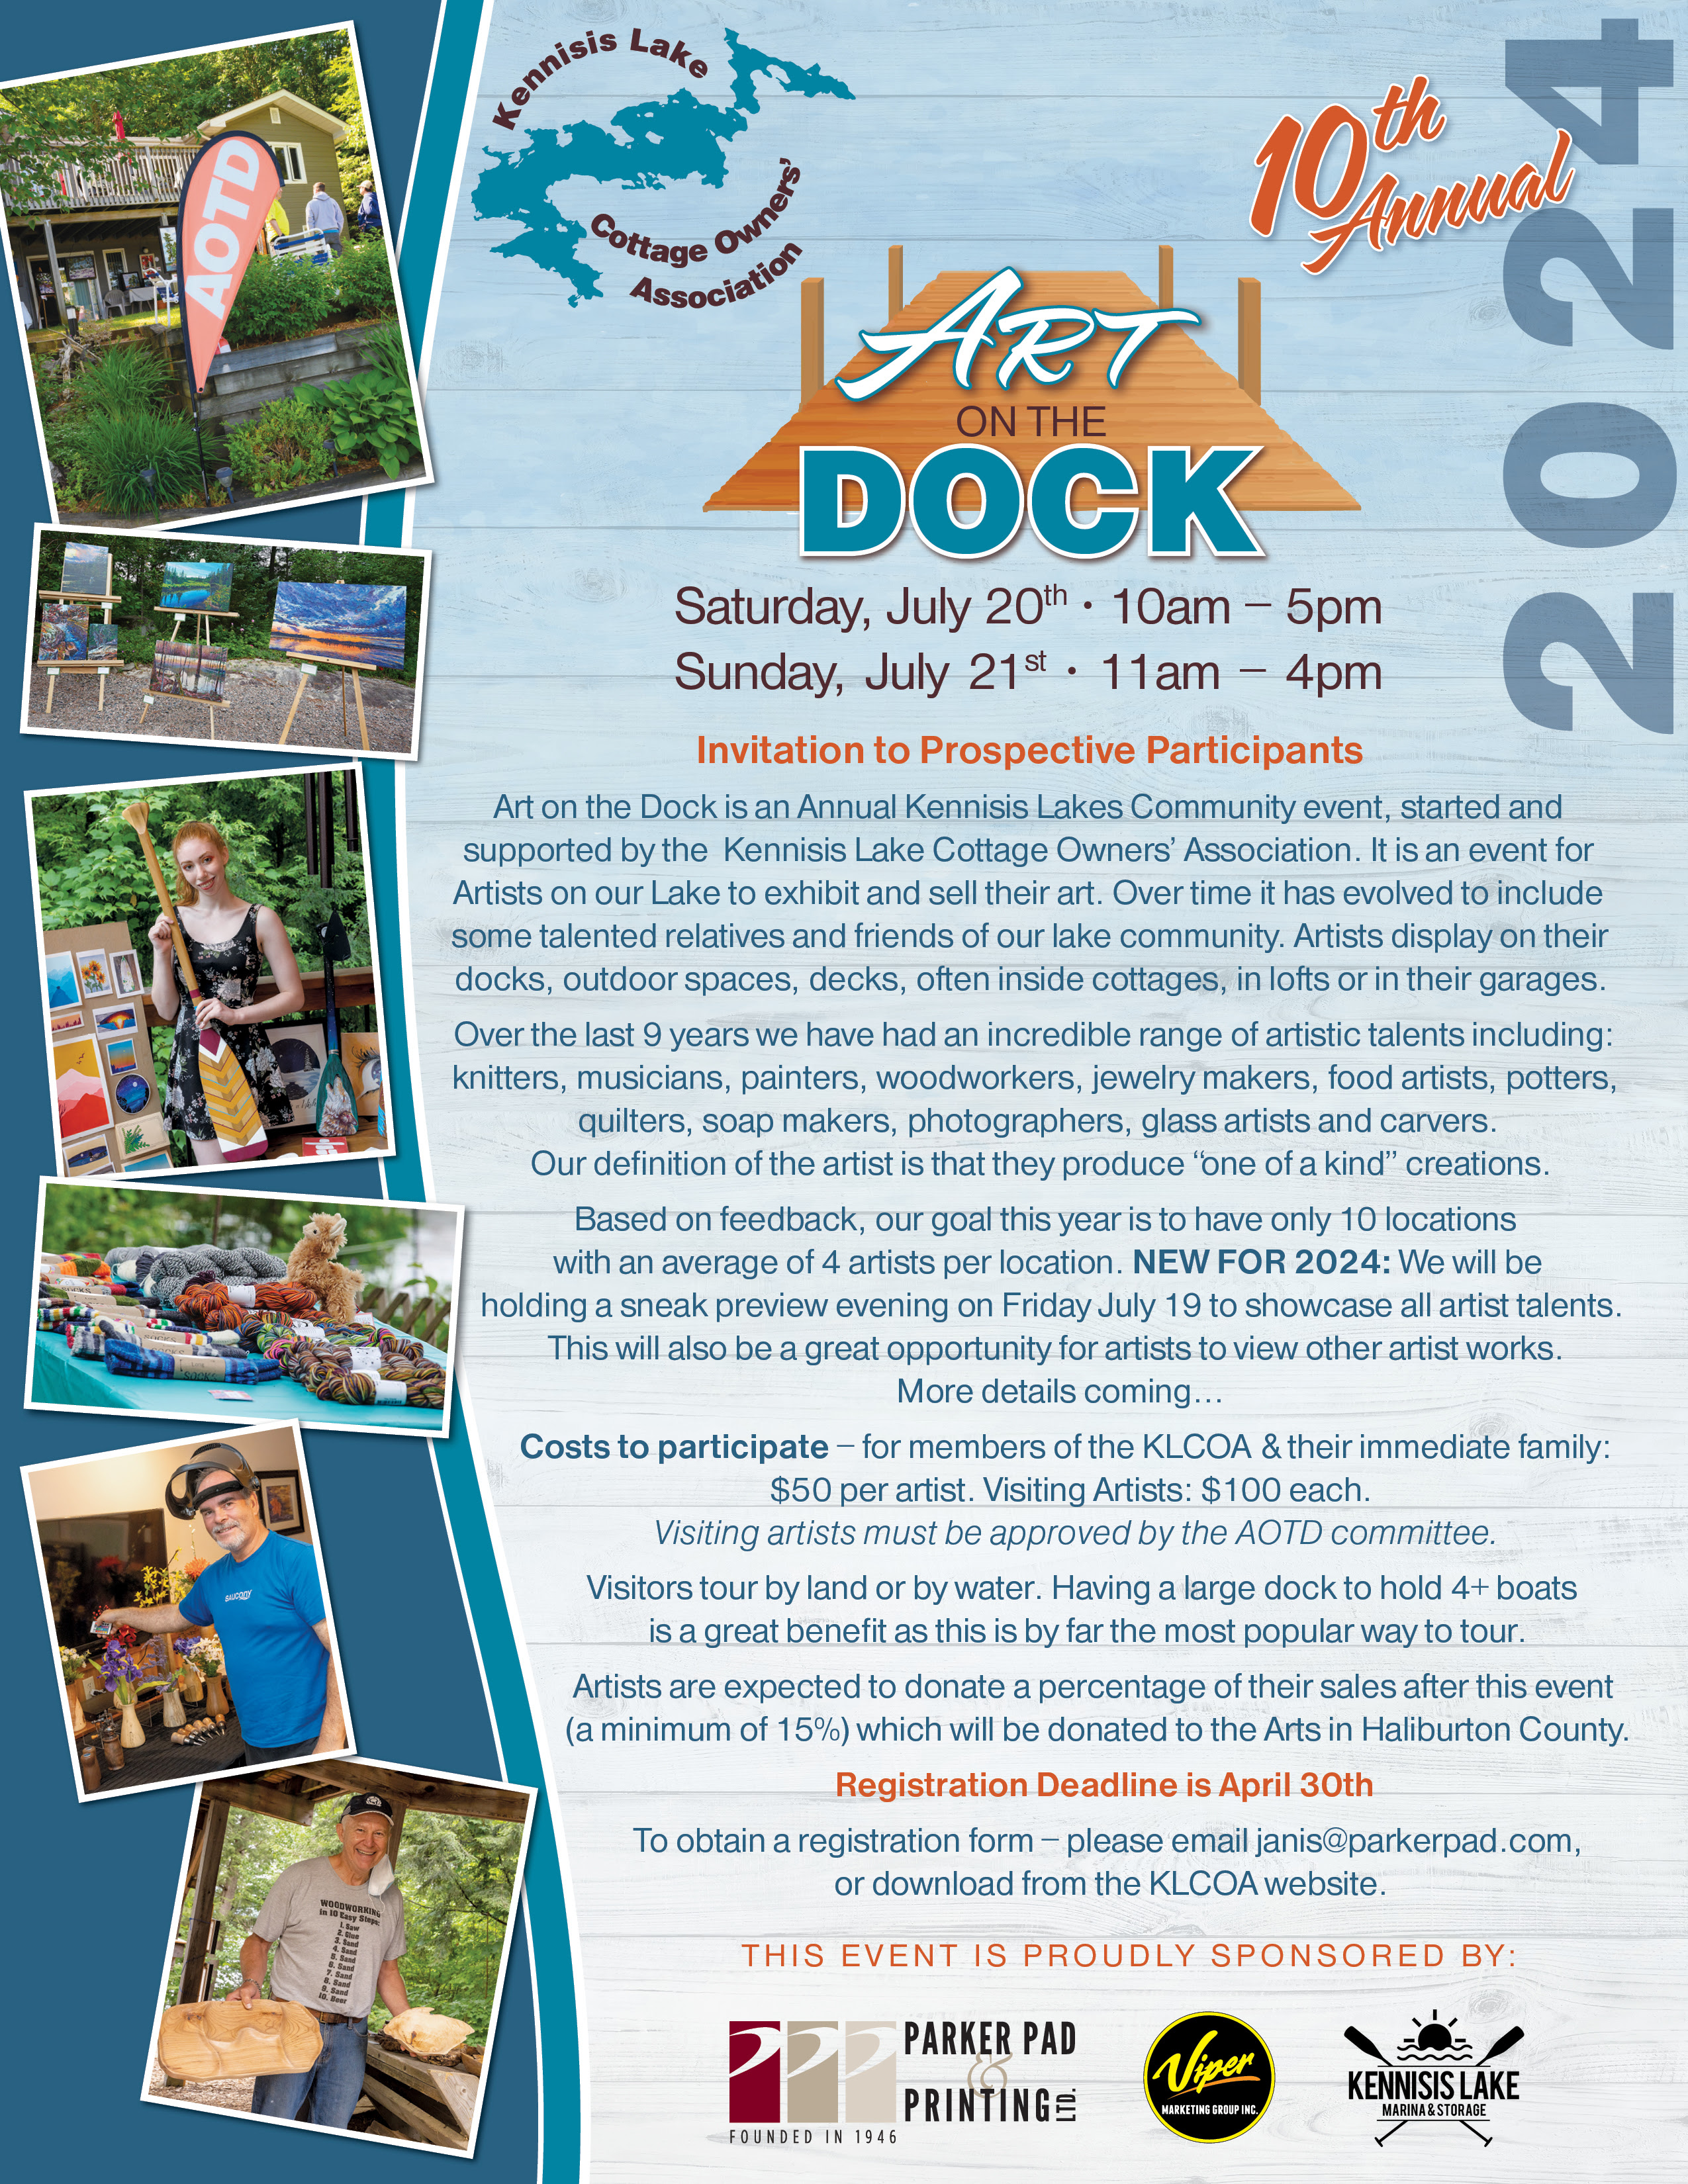 Call for Art on the Dock Artists Submissions – by April 30 – Complete the submission form attached